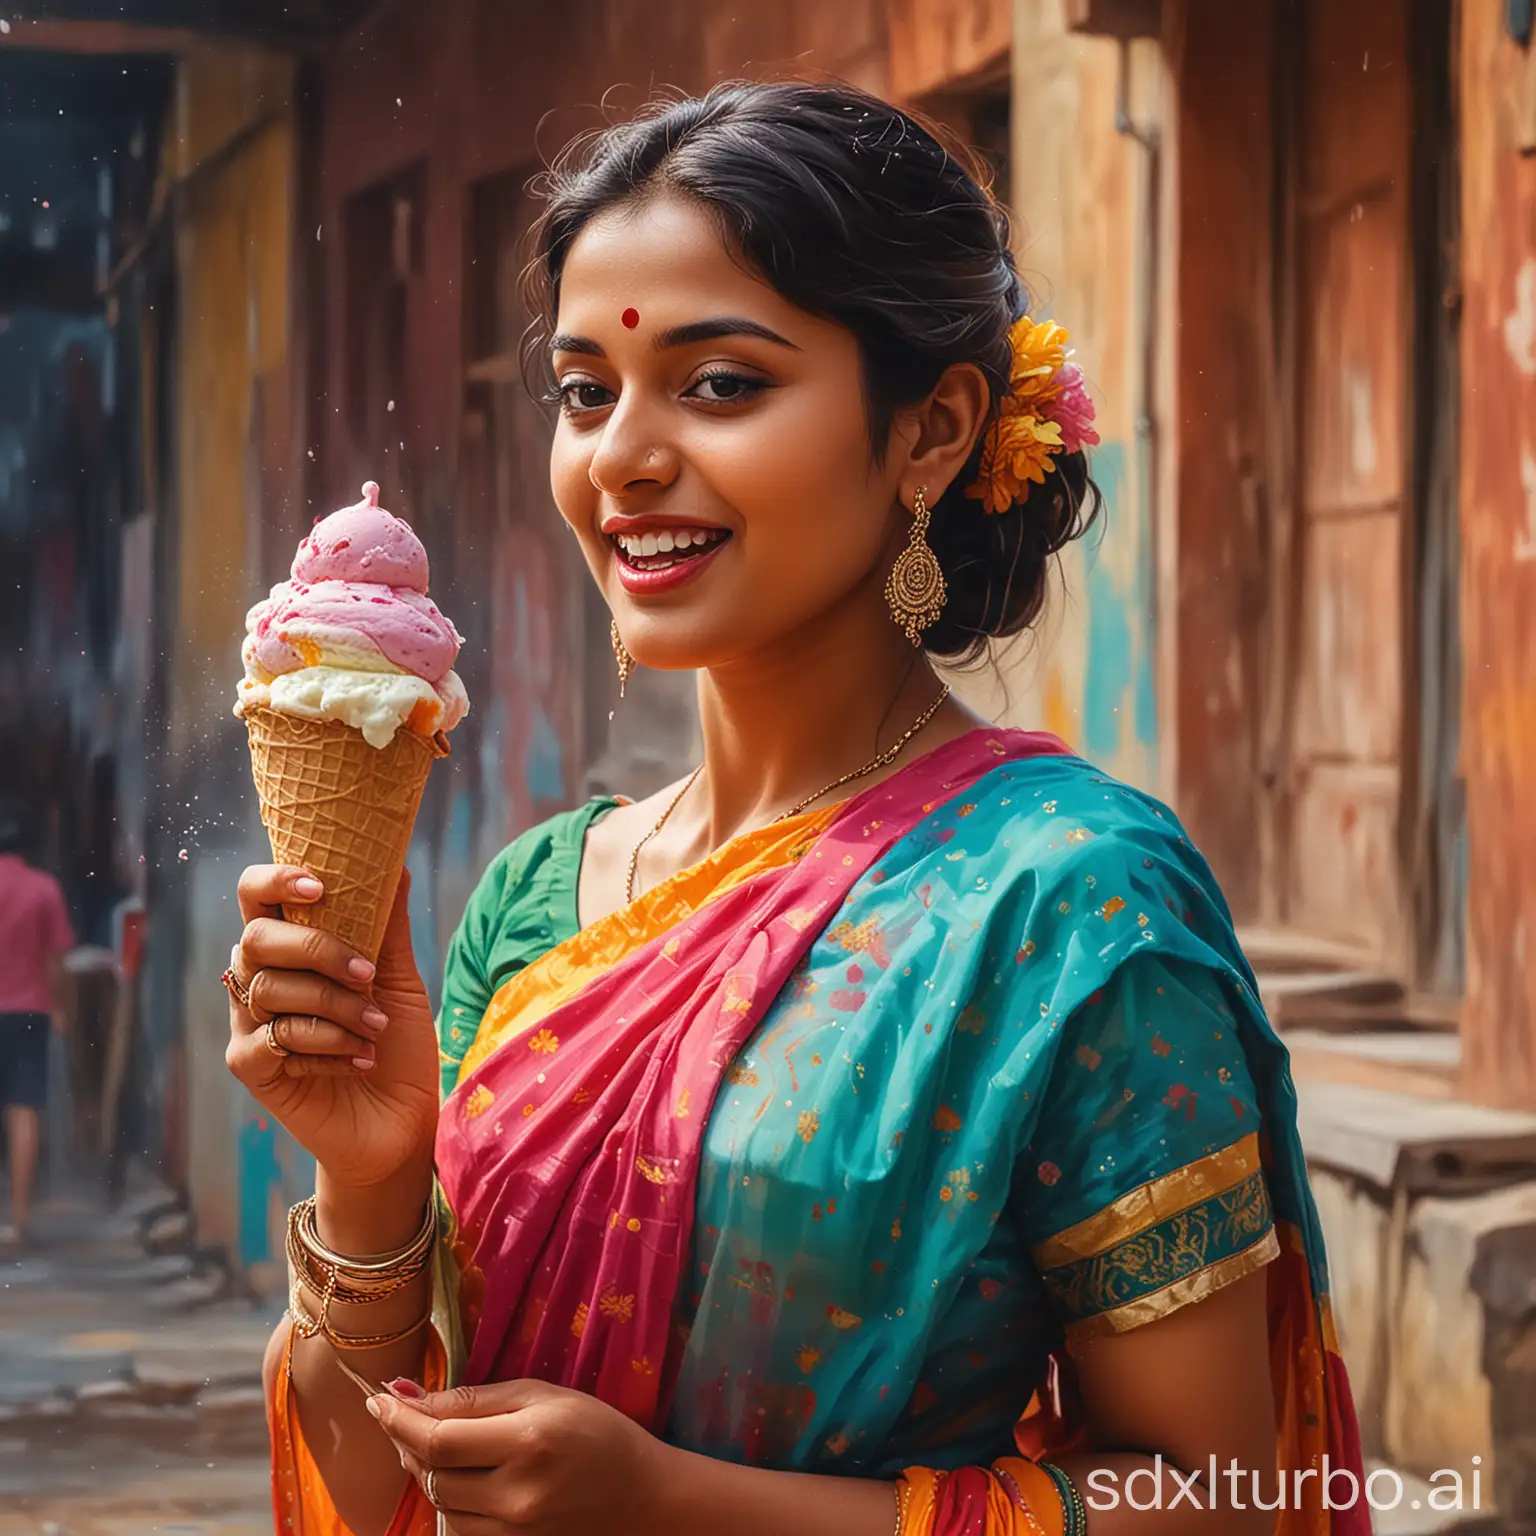 paint a Indian lady in saree showing an amazing experience in here face of pleasure of eating an ice cream. use bold vibrant colors. show motion. sublime.